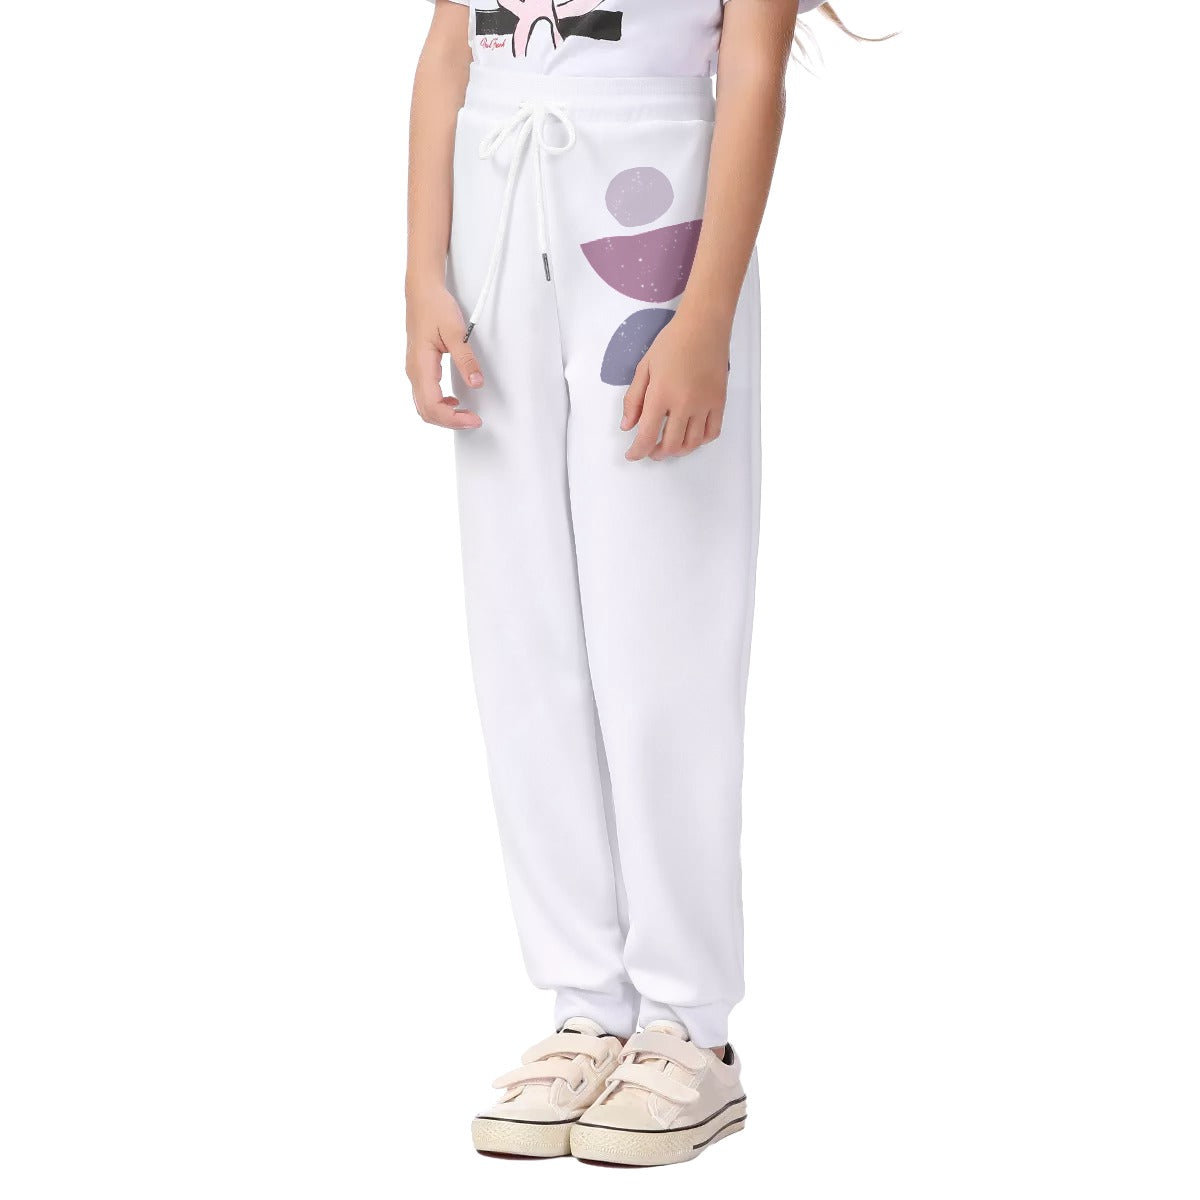 White Kids Yoga Pants - Children’s Yoga Clothes - Personal Hour for Yoga and Meditations 